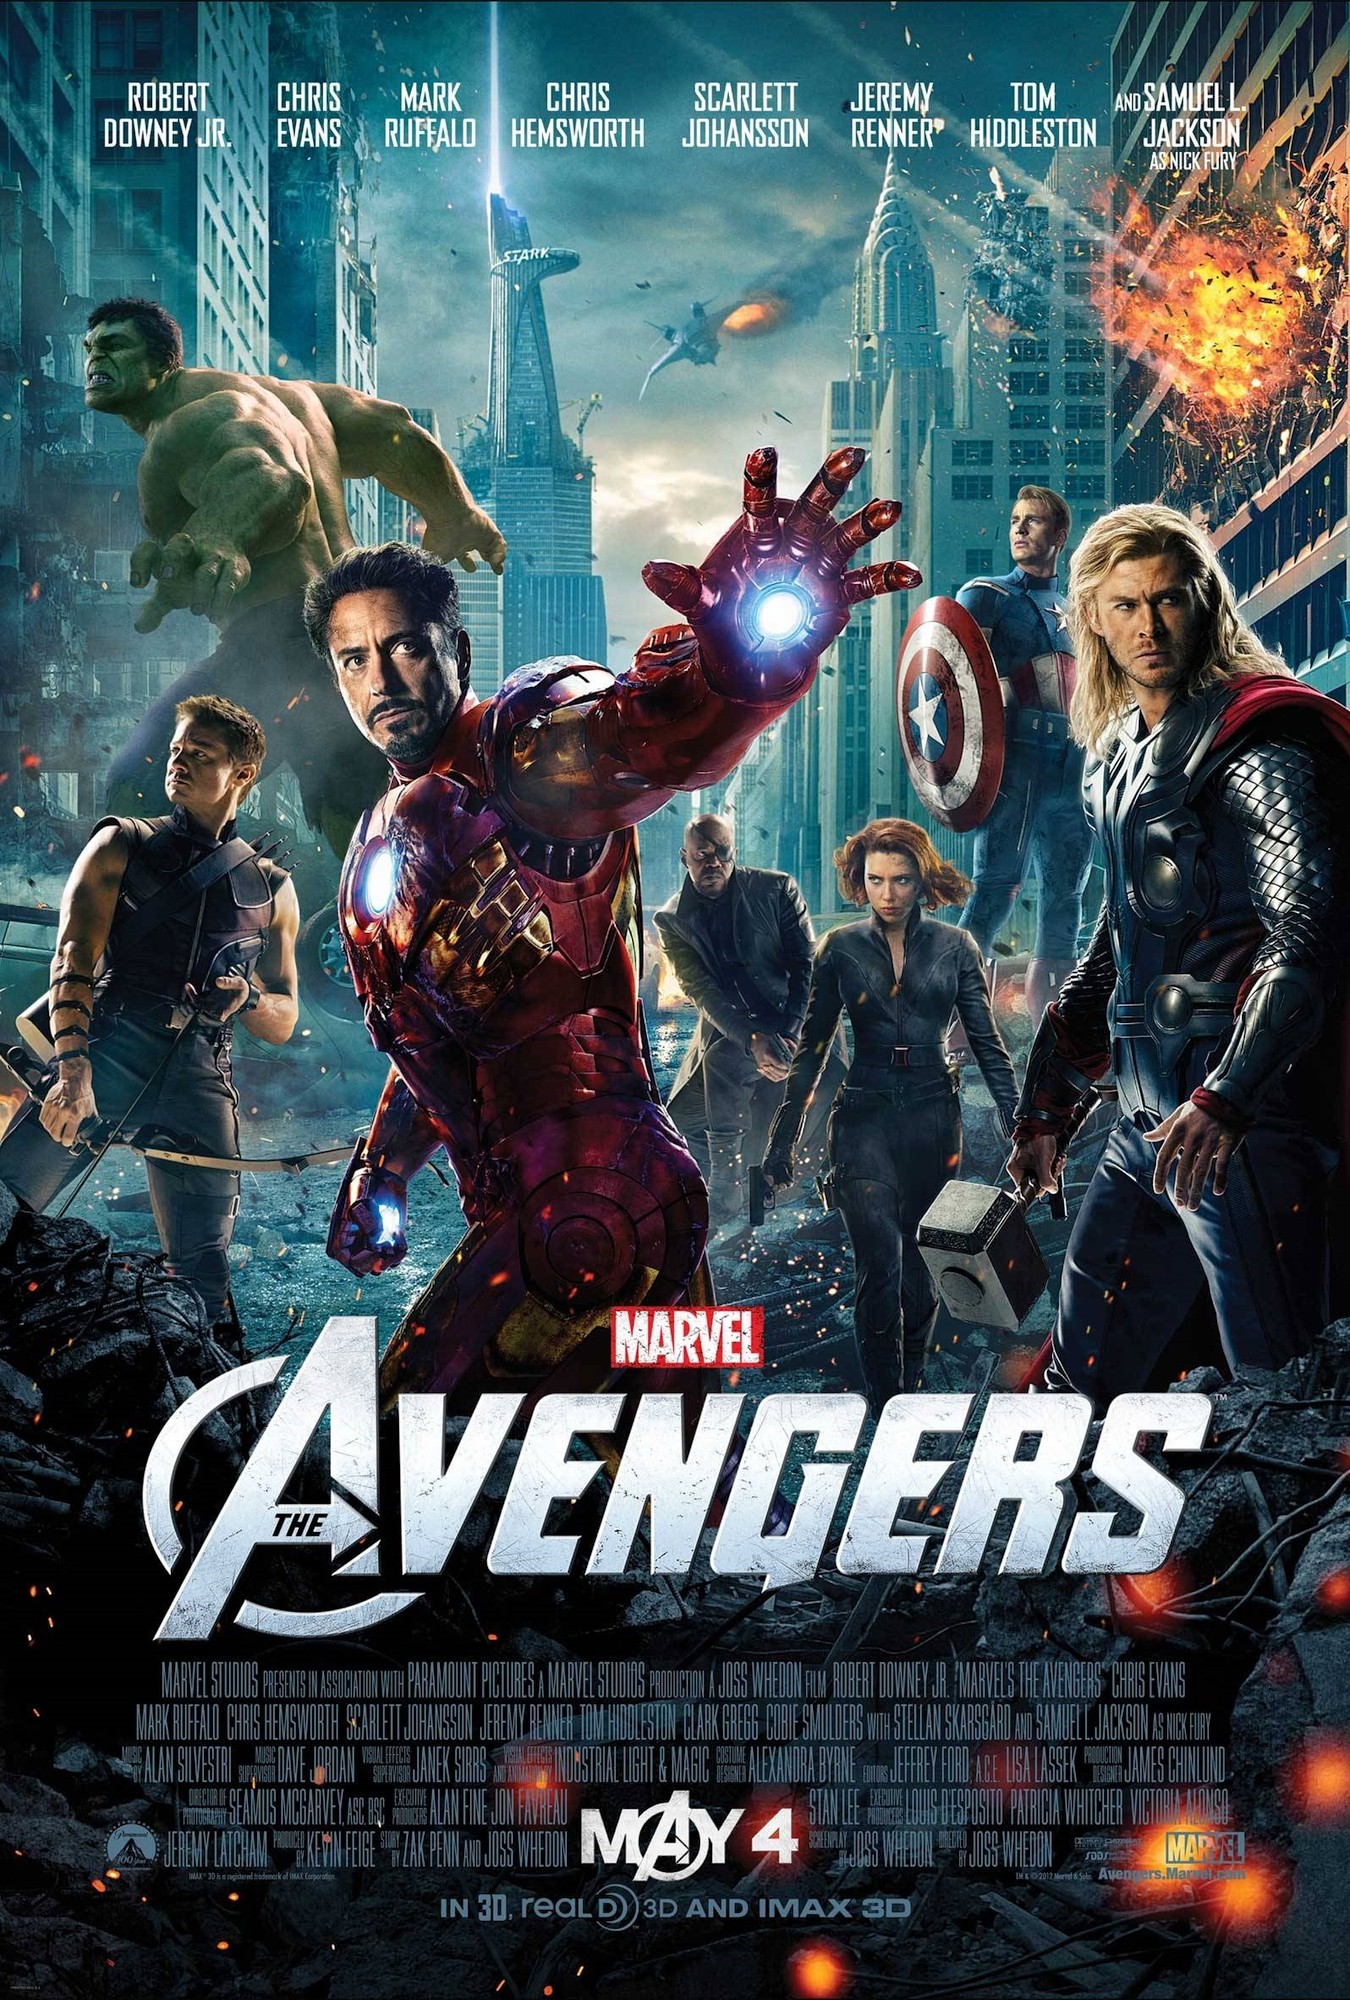 The Avengers Team Lineup Looks Very Different In Kang Dynasty Fan Poster -  IMDb